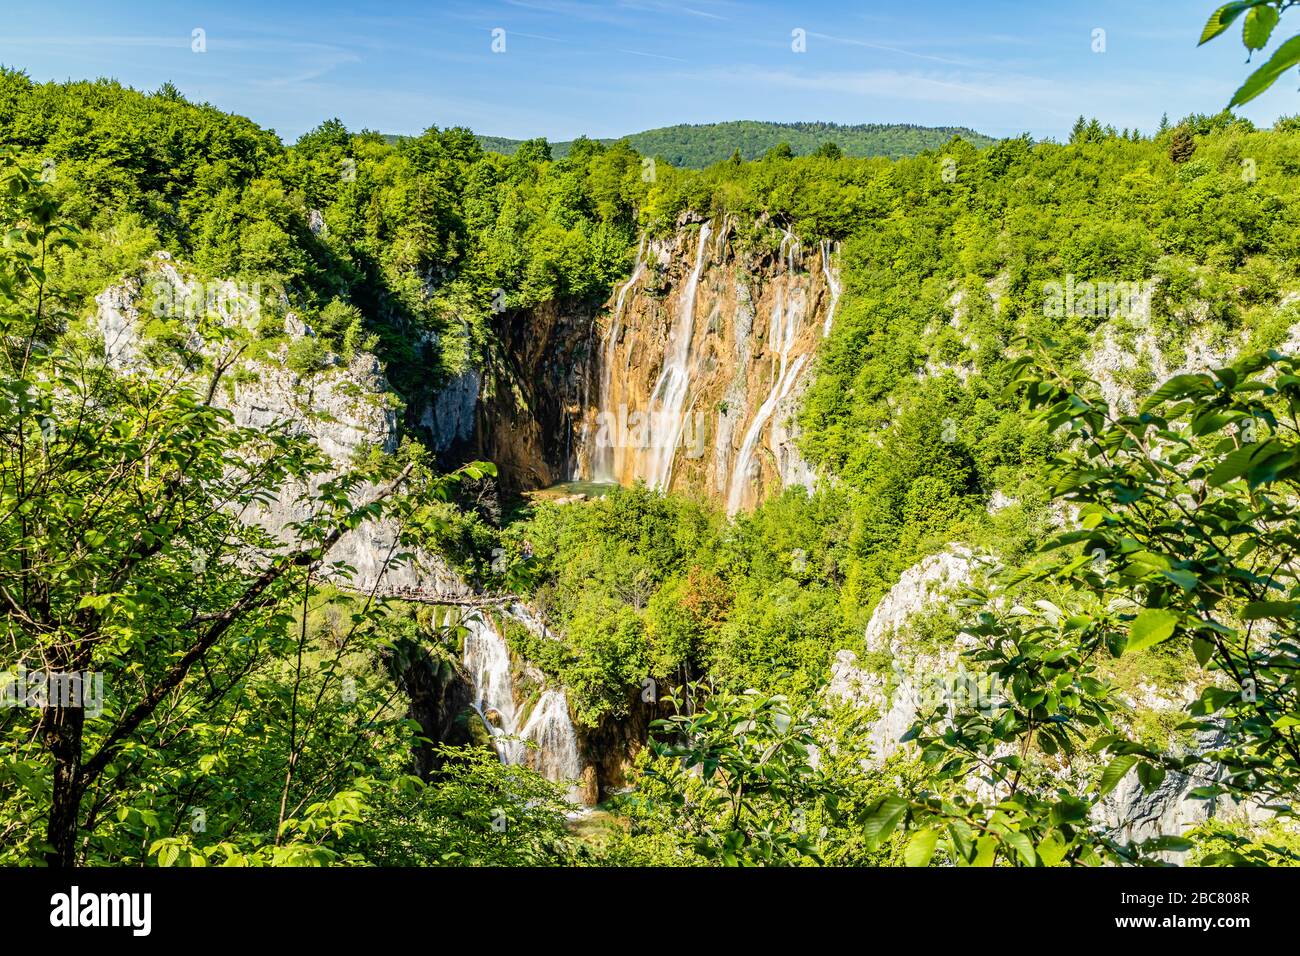 Veliki Slap, the Large or Great Waterfall, at Plitvice Lakes National Park in Croatia, Europe. May 2017. Stock Photo